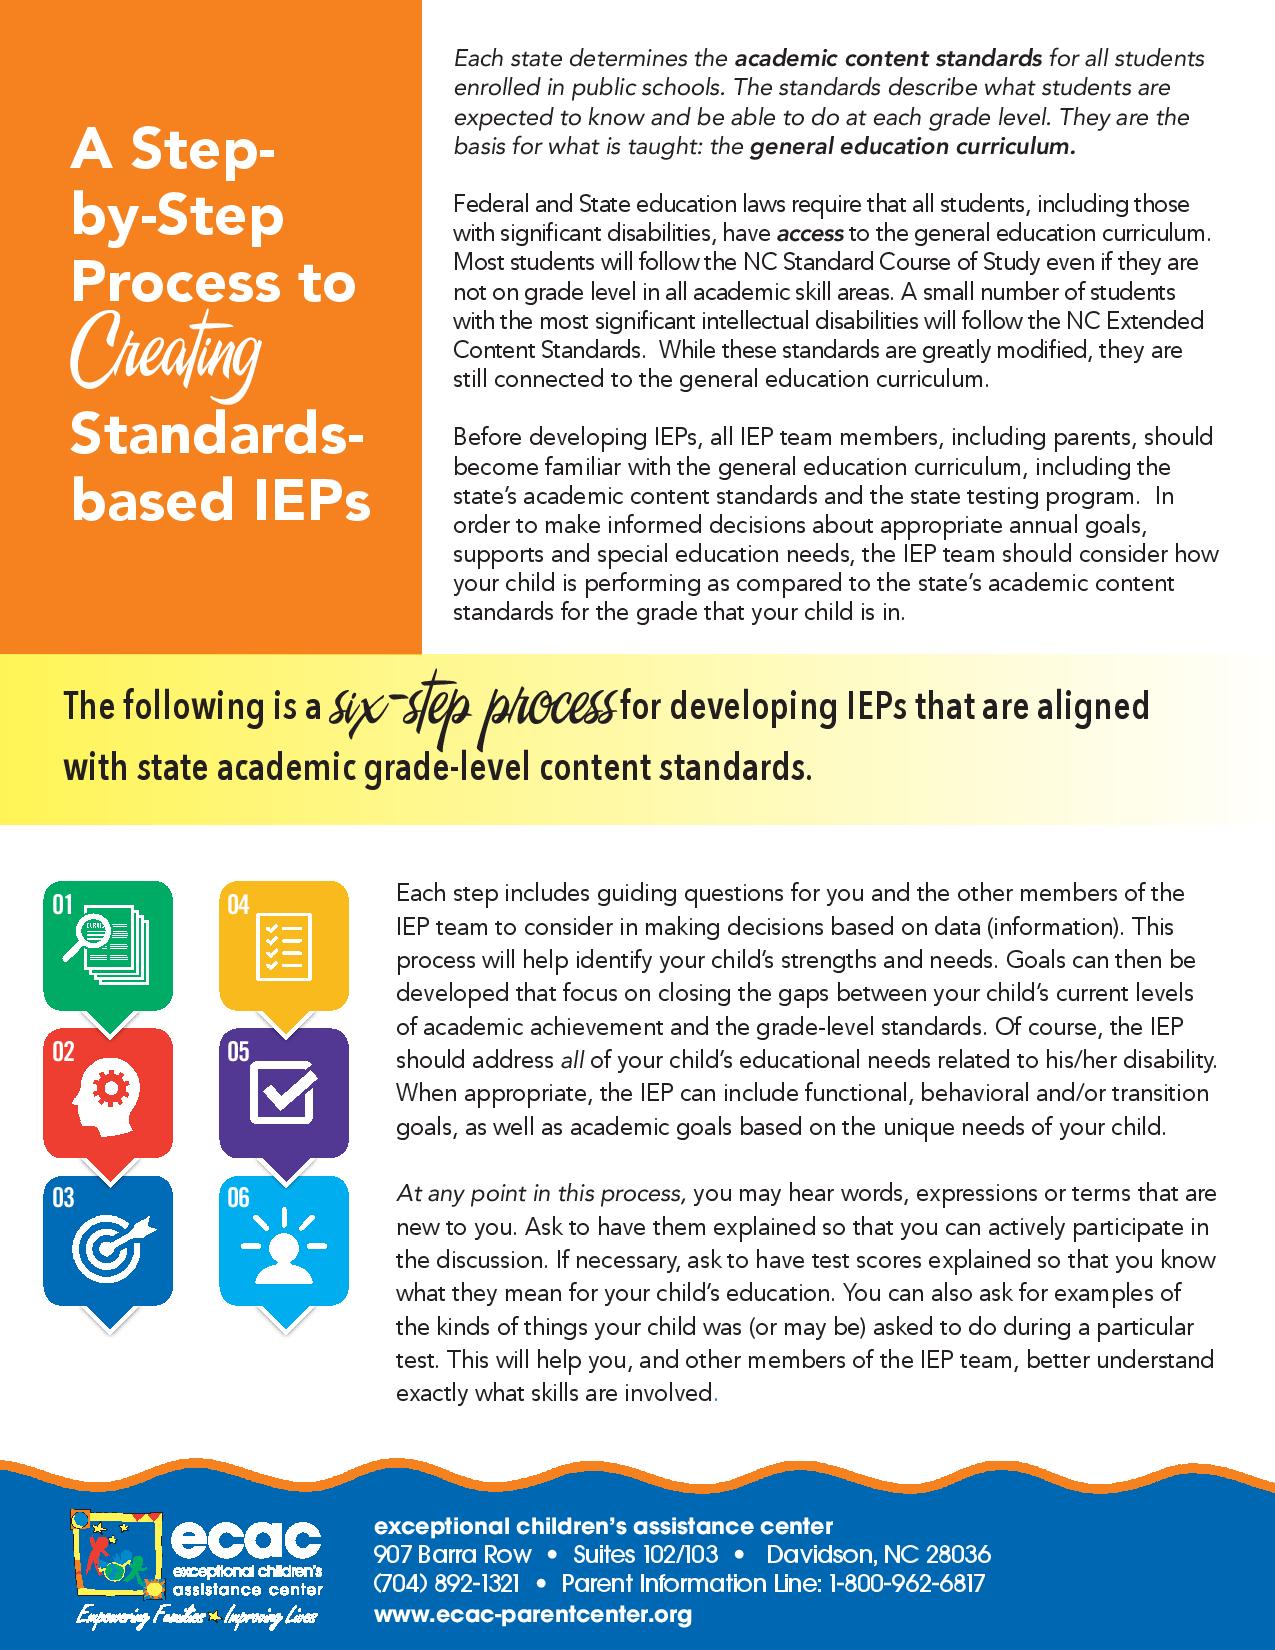 image of standards based IEP guide